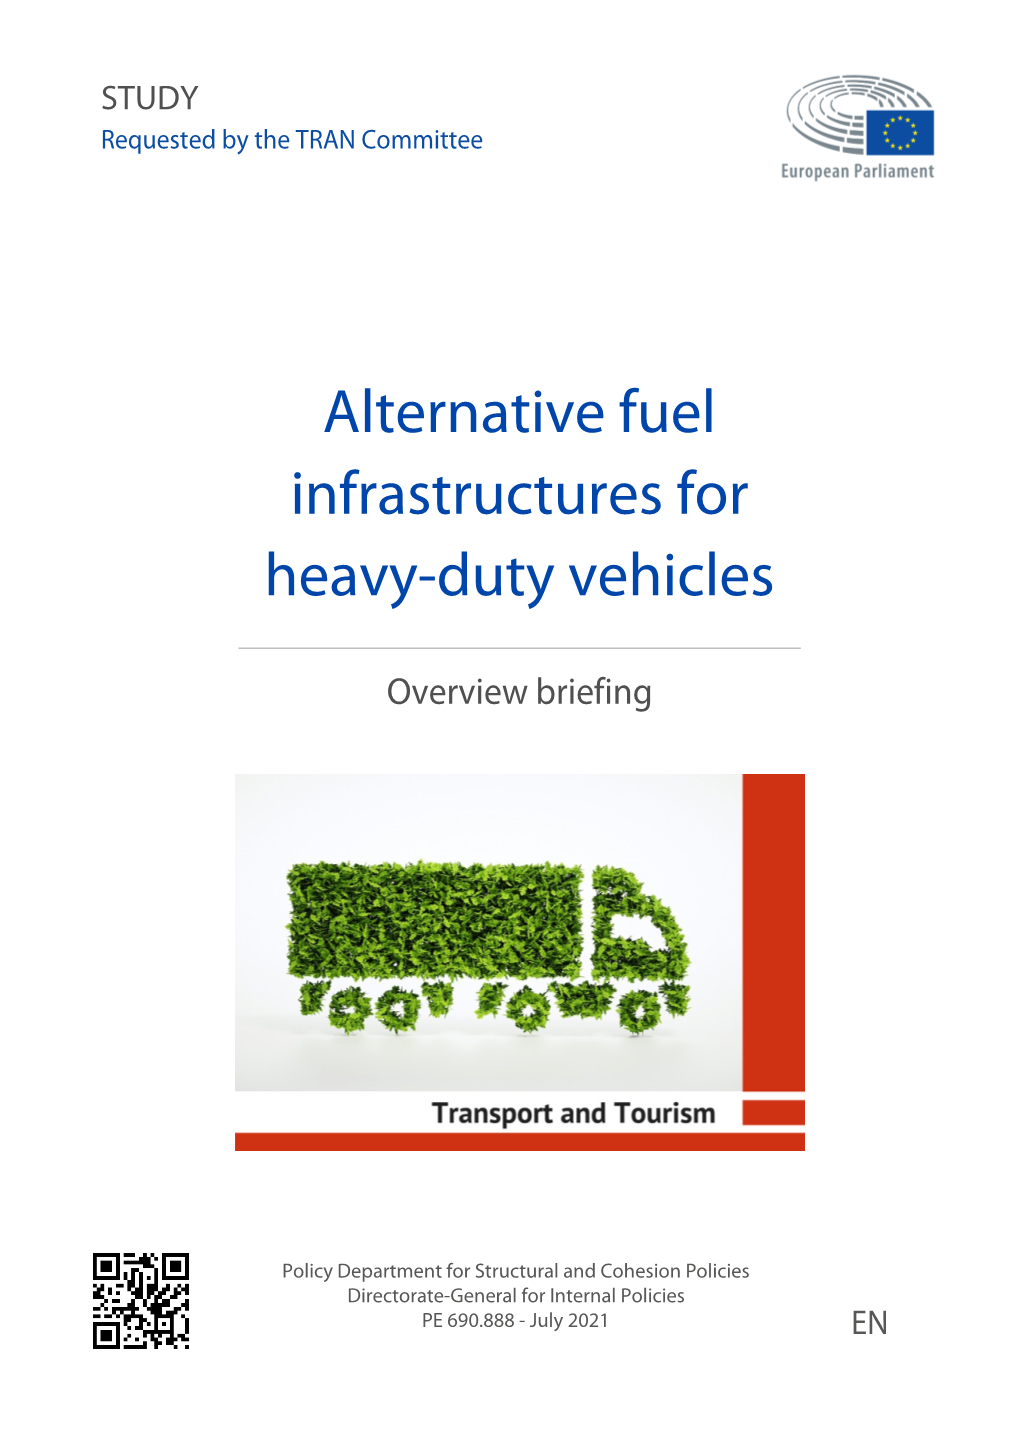 Alternative Fuel Infrastructures for Heavy-Duty Vehicles